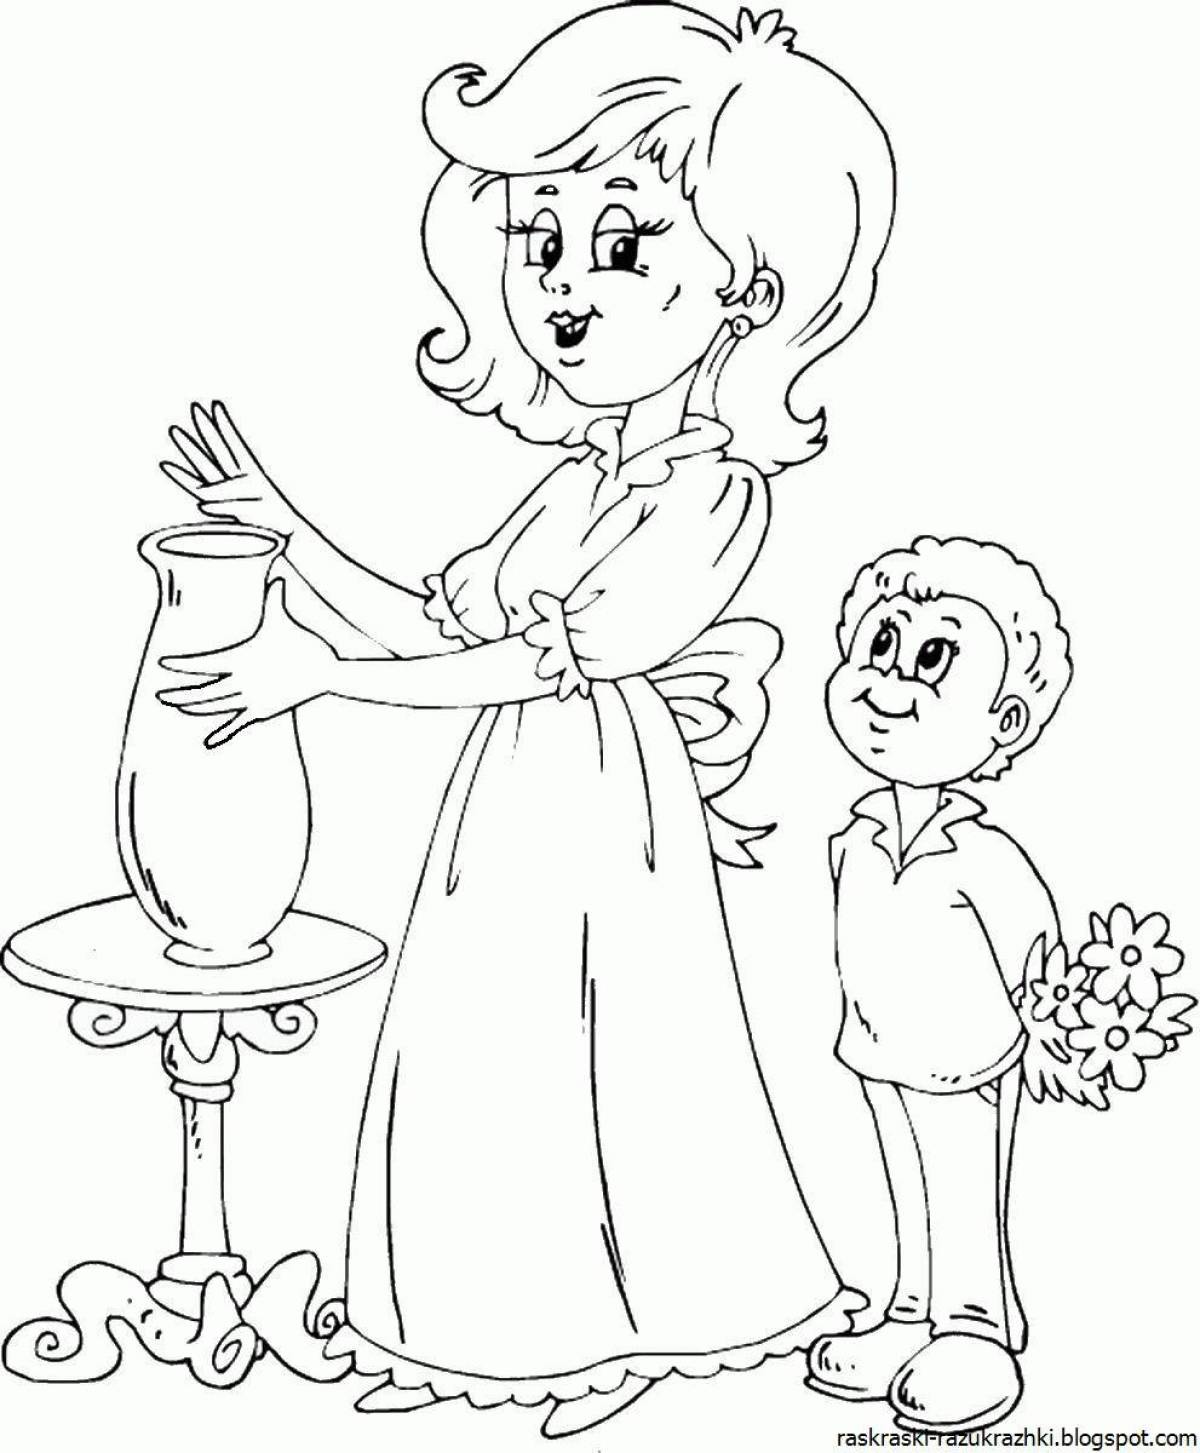 Charming mother coloring page